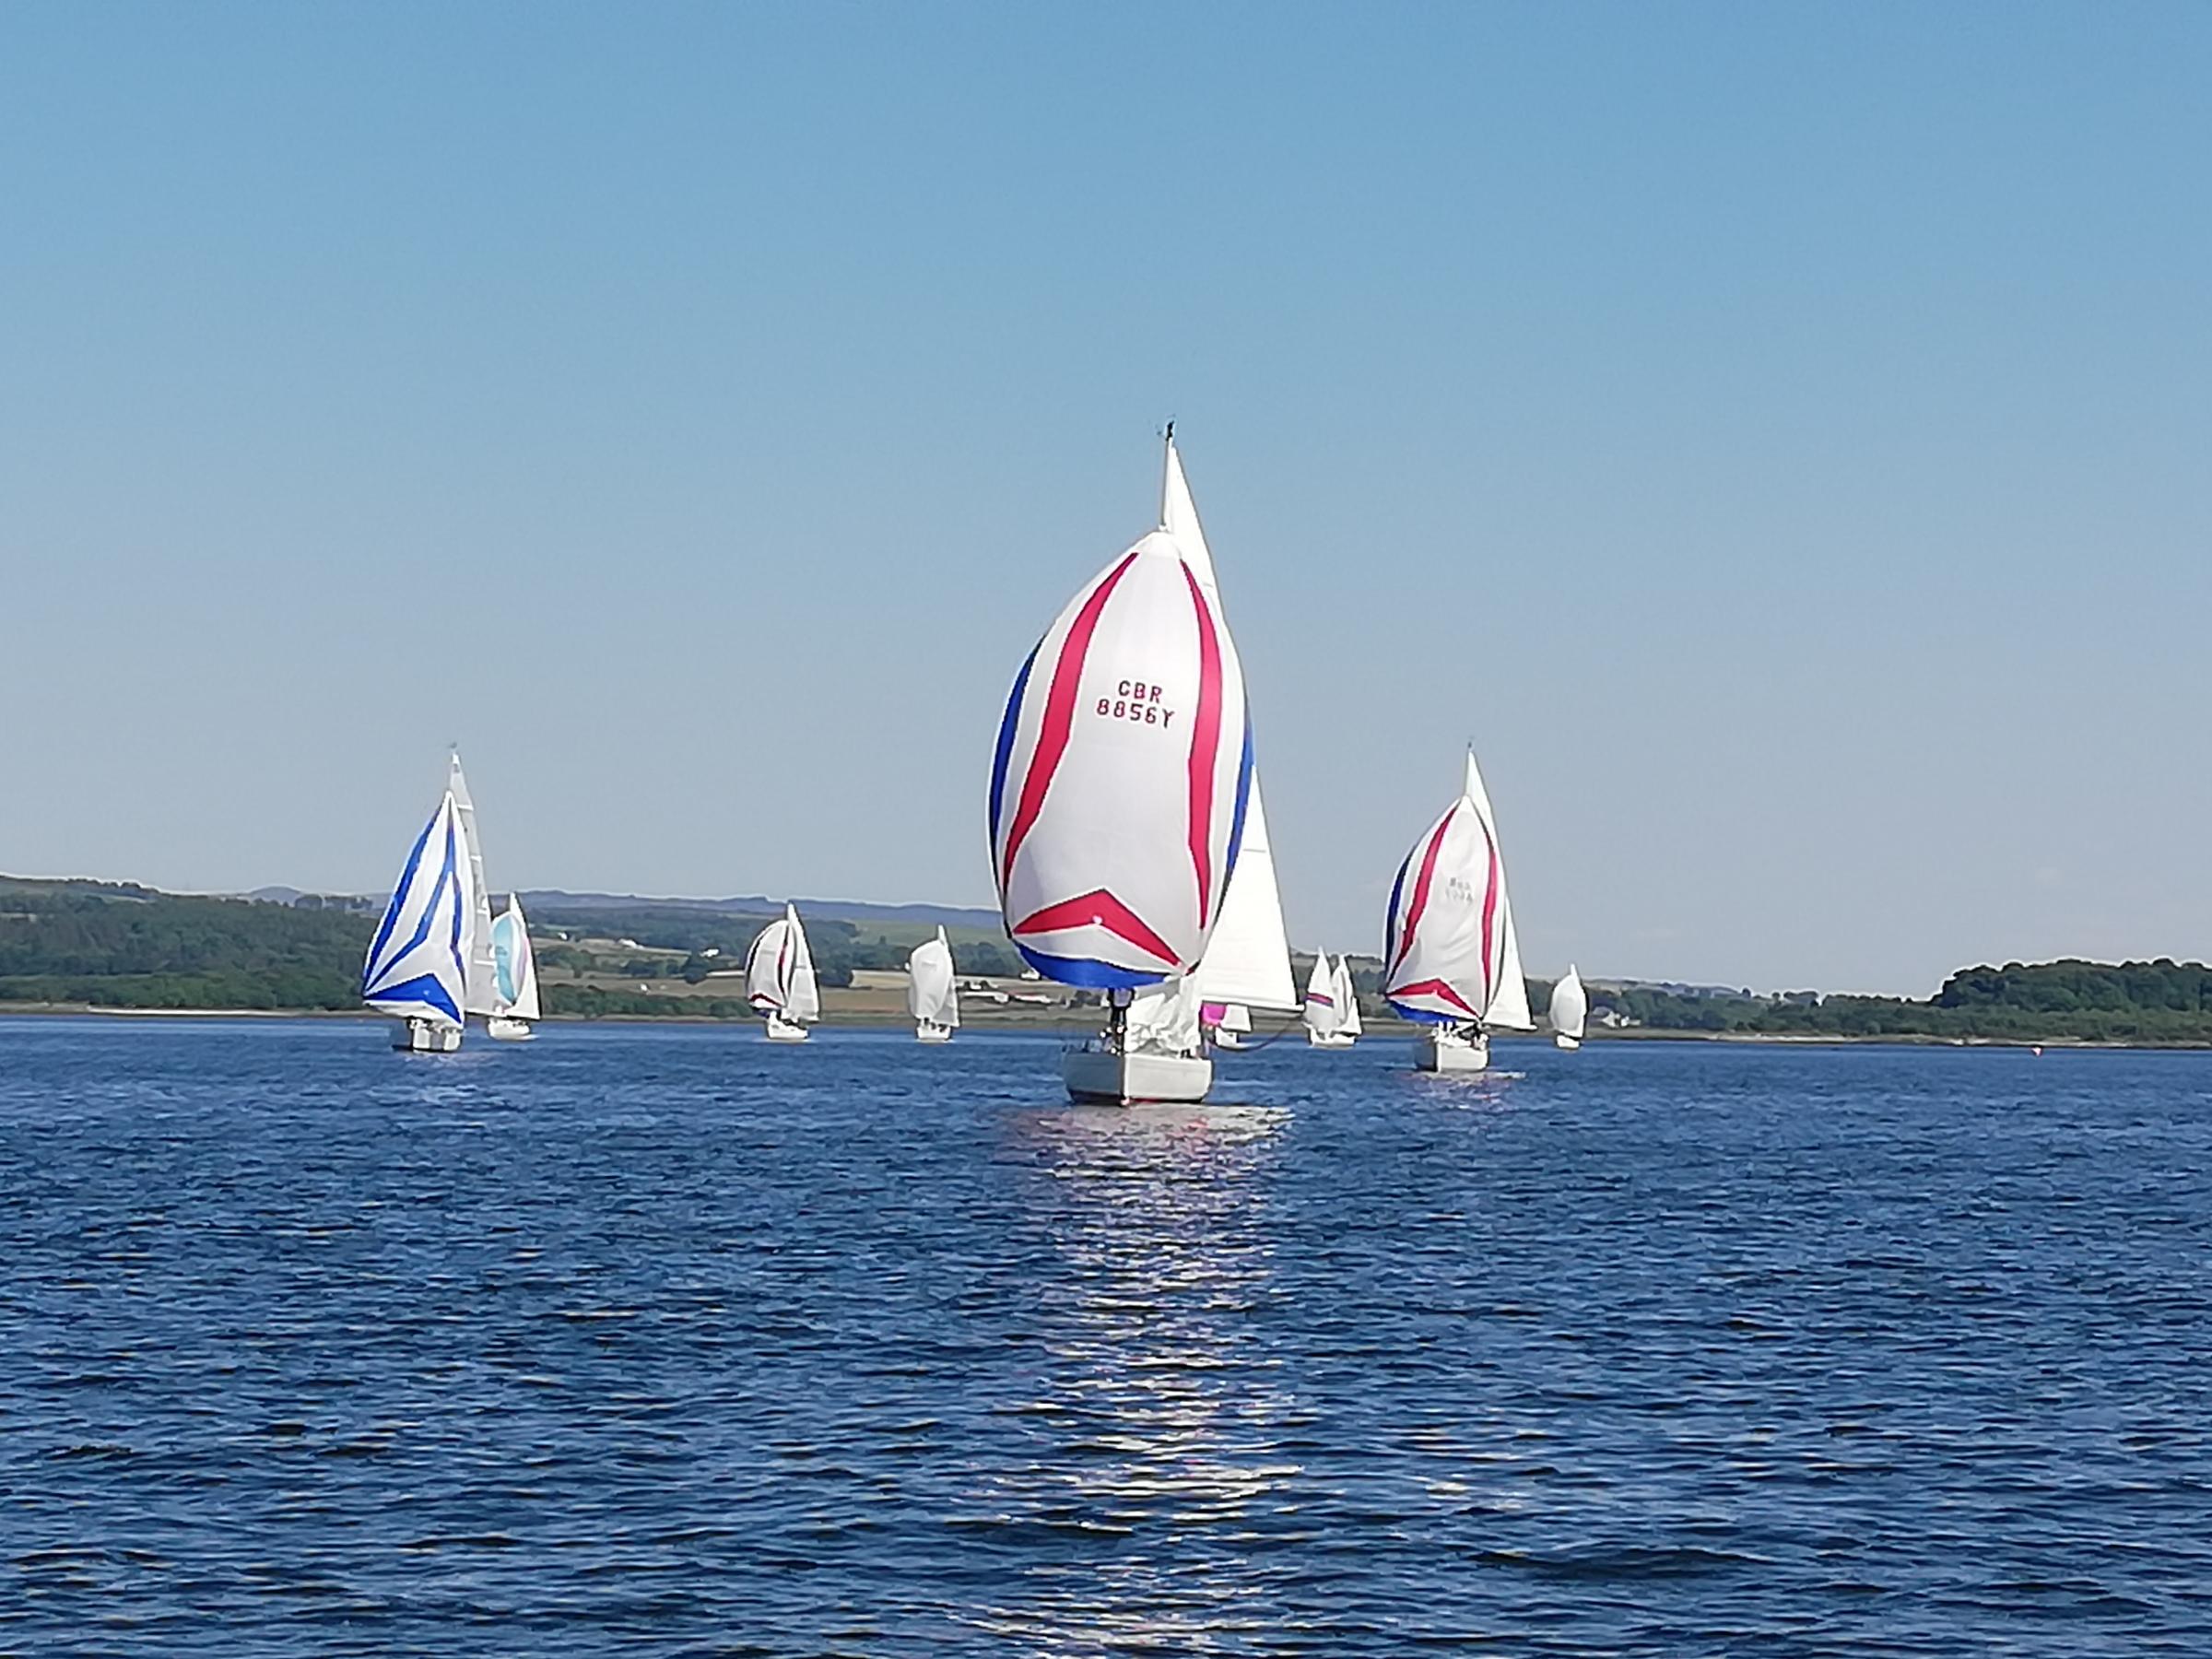 The Sigma 33 National Championships brought dinghies and crews to Helensburgh from as far afield as Dublin Bay and Waterford